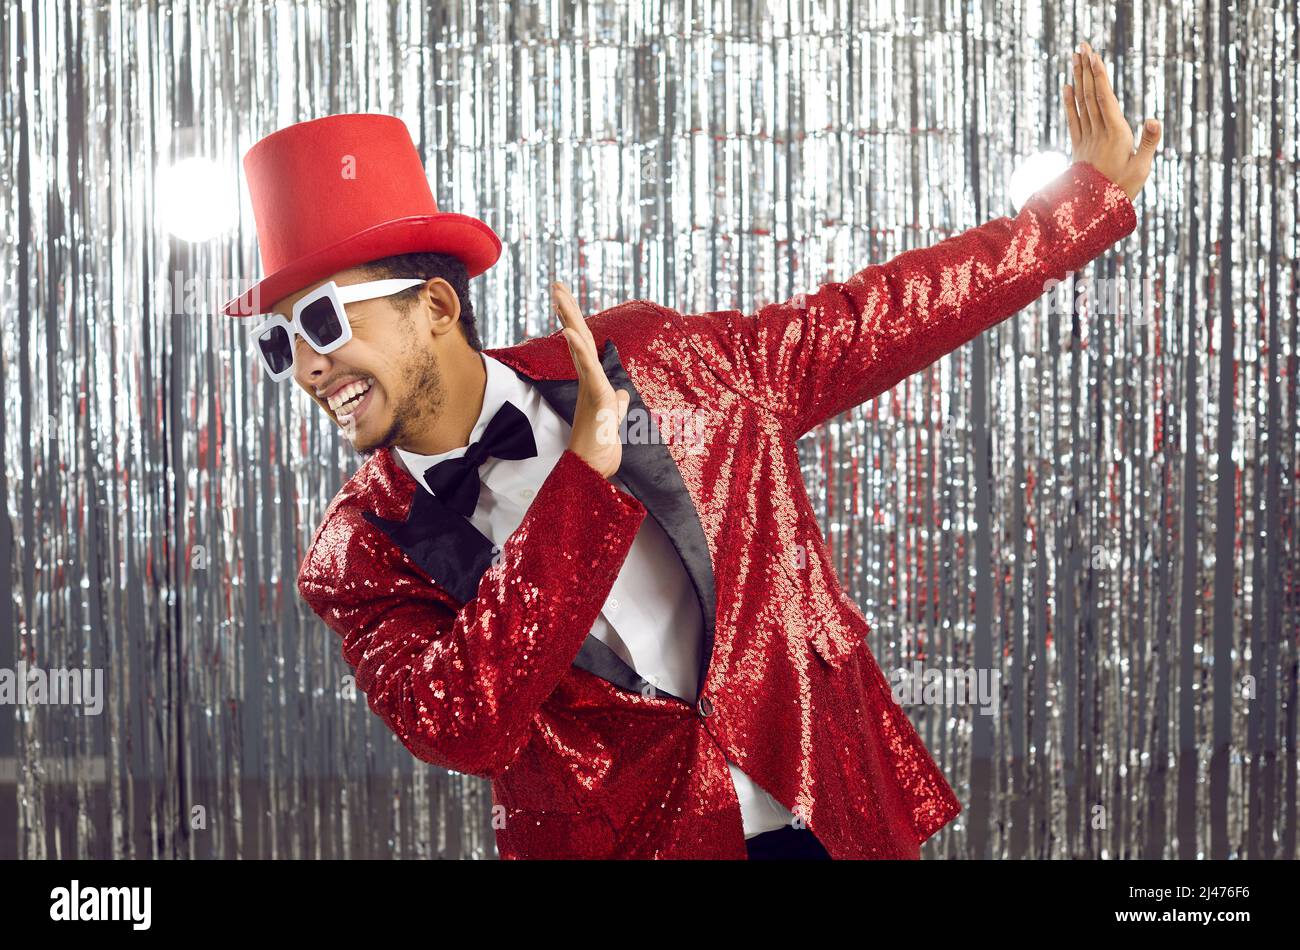 Funny young black guy in a sequin jacket, top hat and sunglasses dancing at a party Stock Photo